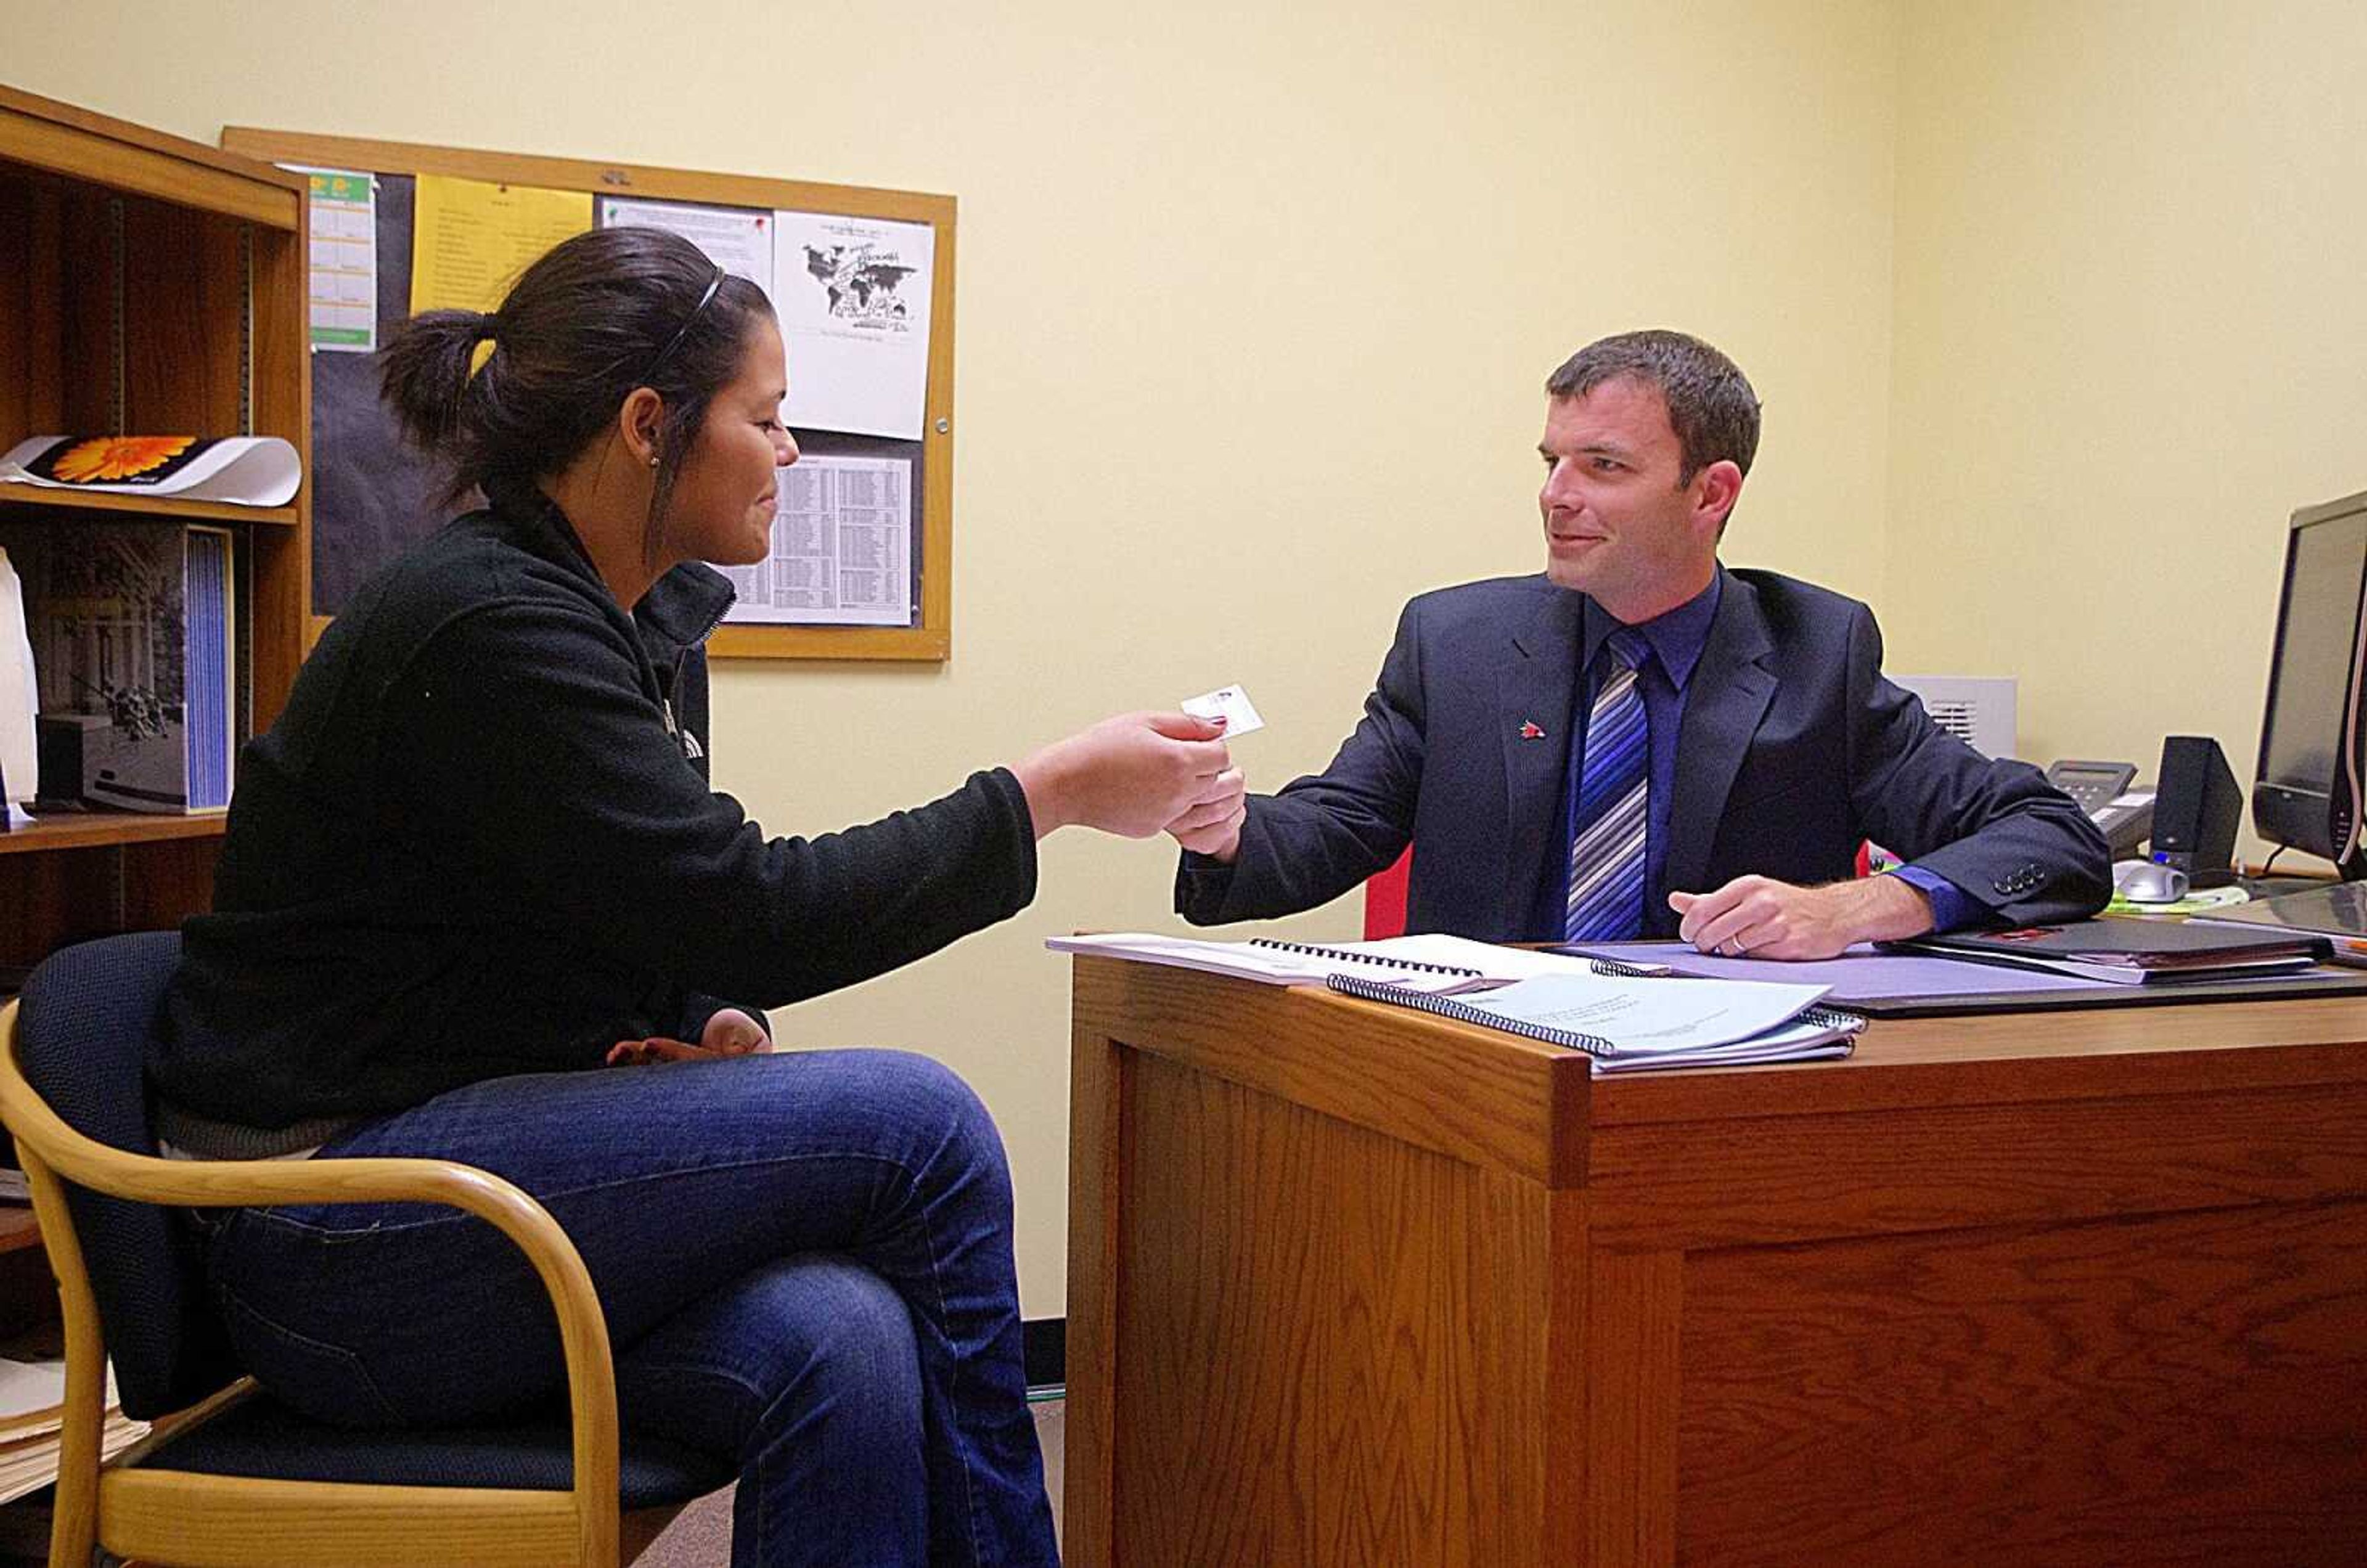 Graduate assistant Kasey Fraser-Smith, left, receives a business card from Jeremy McBroom on Monday in his office, so she can contact him if she comes up with any questions. Photo by Nathan Hamilton